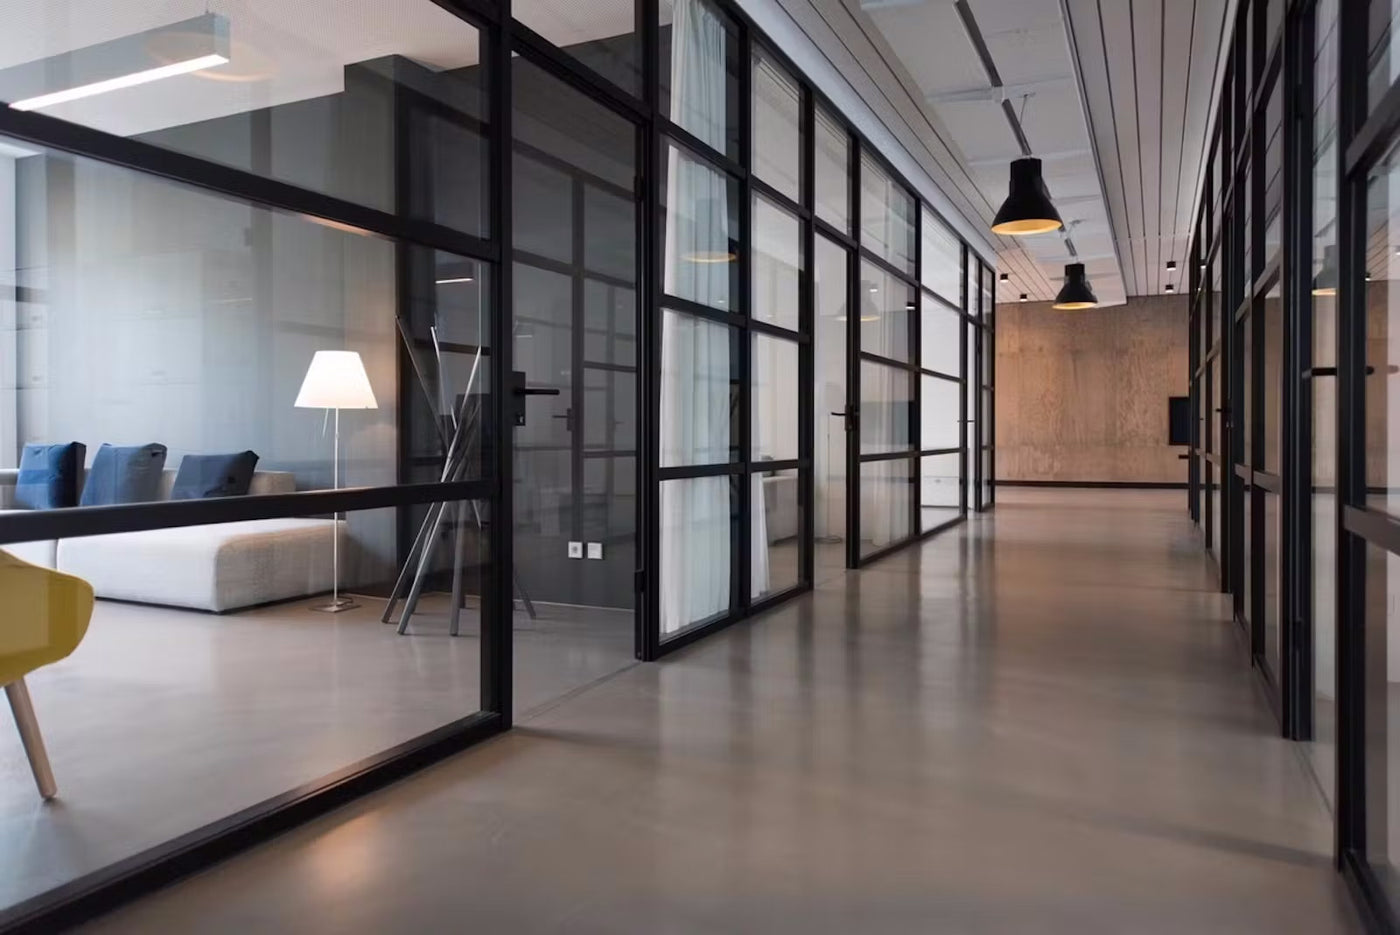 An office building hallway with glass walls